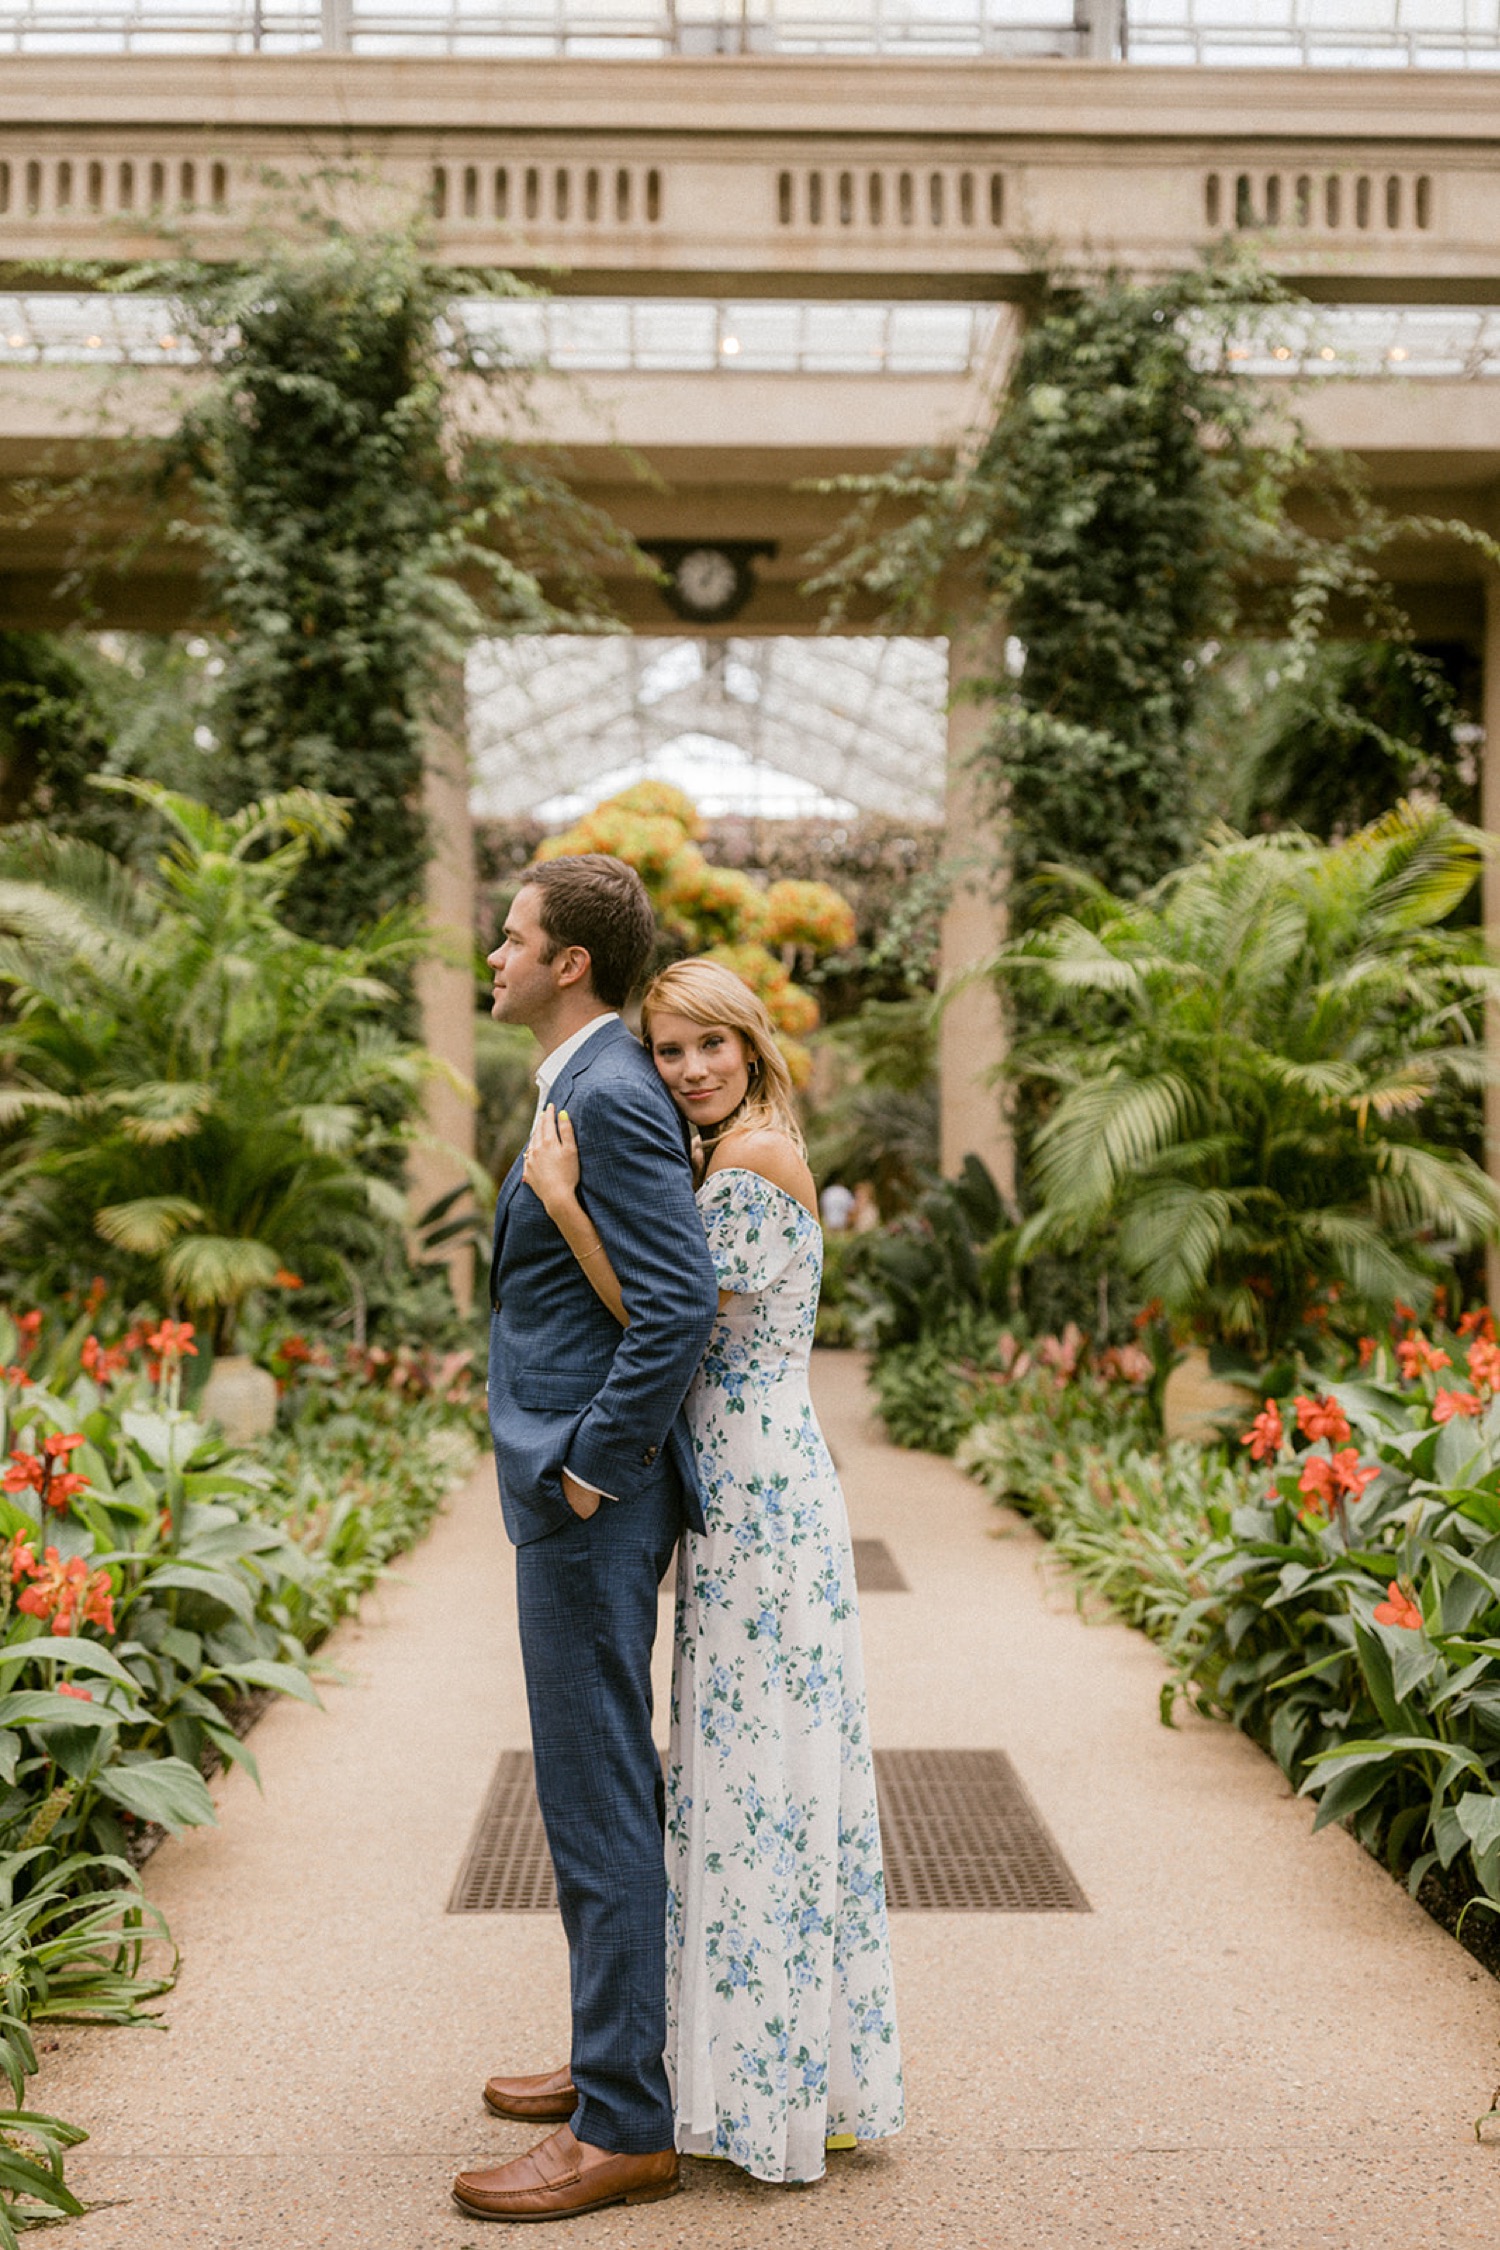 hugging from behind formal engagement session in greenhouse